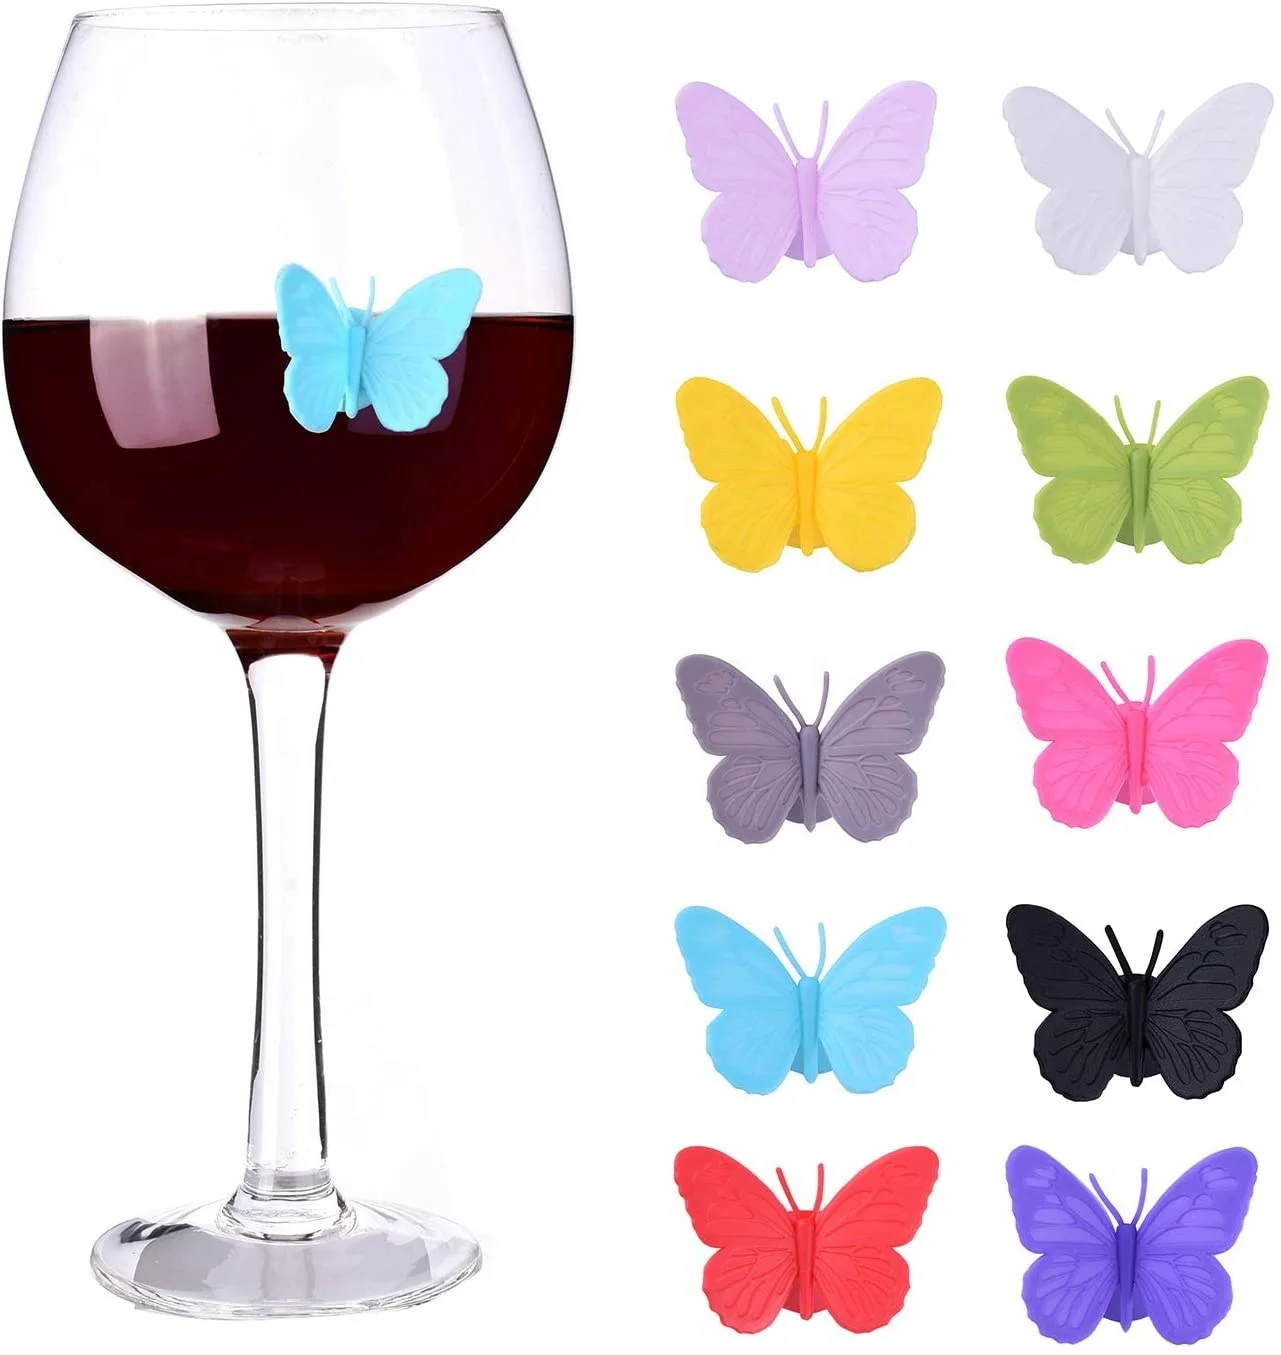 

OKSILICONE Mini Butterfly Silicone Marker With Sucker For Goblet Drink Markers Labels Glass Party Wine Charms Universal Marker, As picture shown/customized